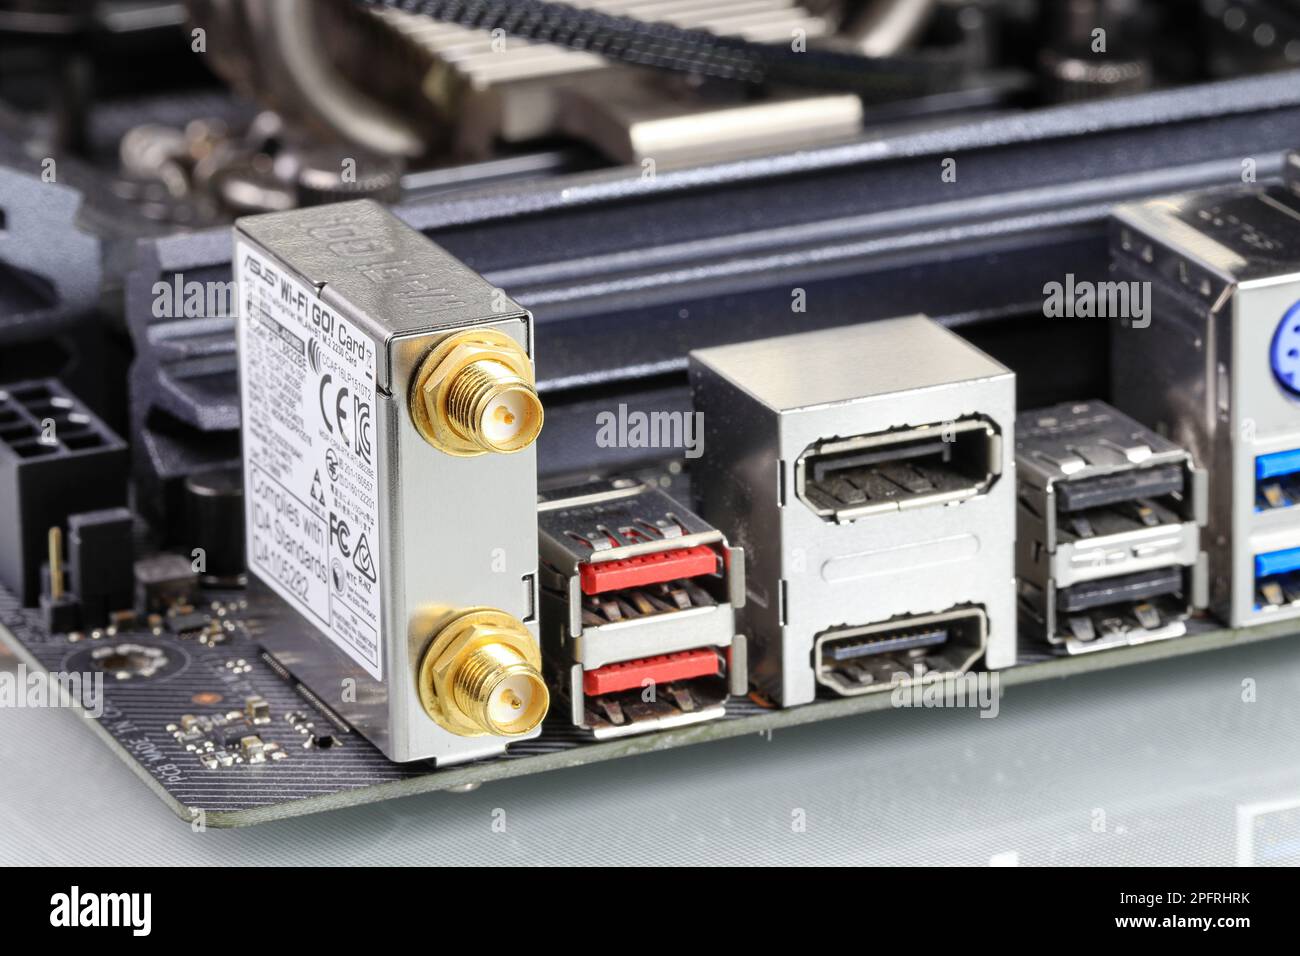 Multiple ports on modern computer mainboard show with HDMI, Display port, USB 3.2 type A, usb 3.1, Wifi, ps2. Stock Photo